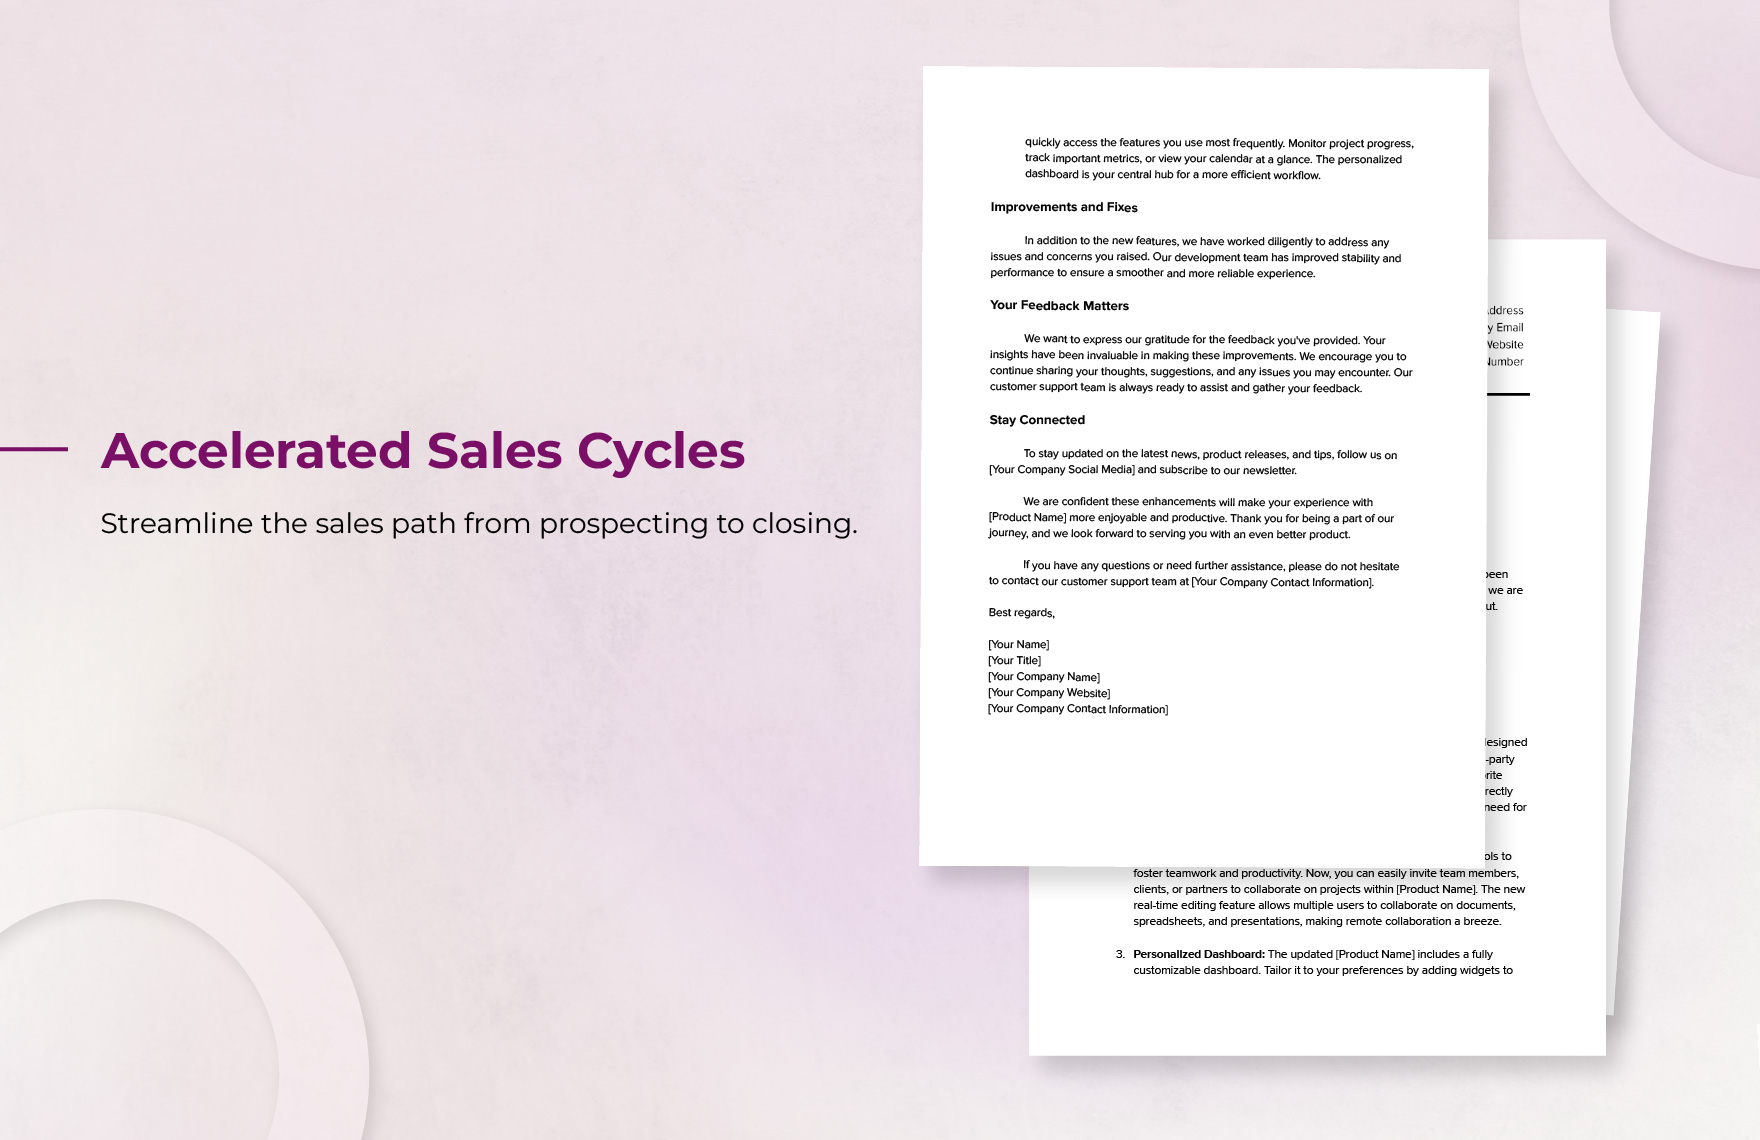 Sales Product Update Announcement Based on Feedback Template